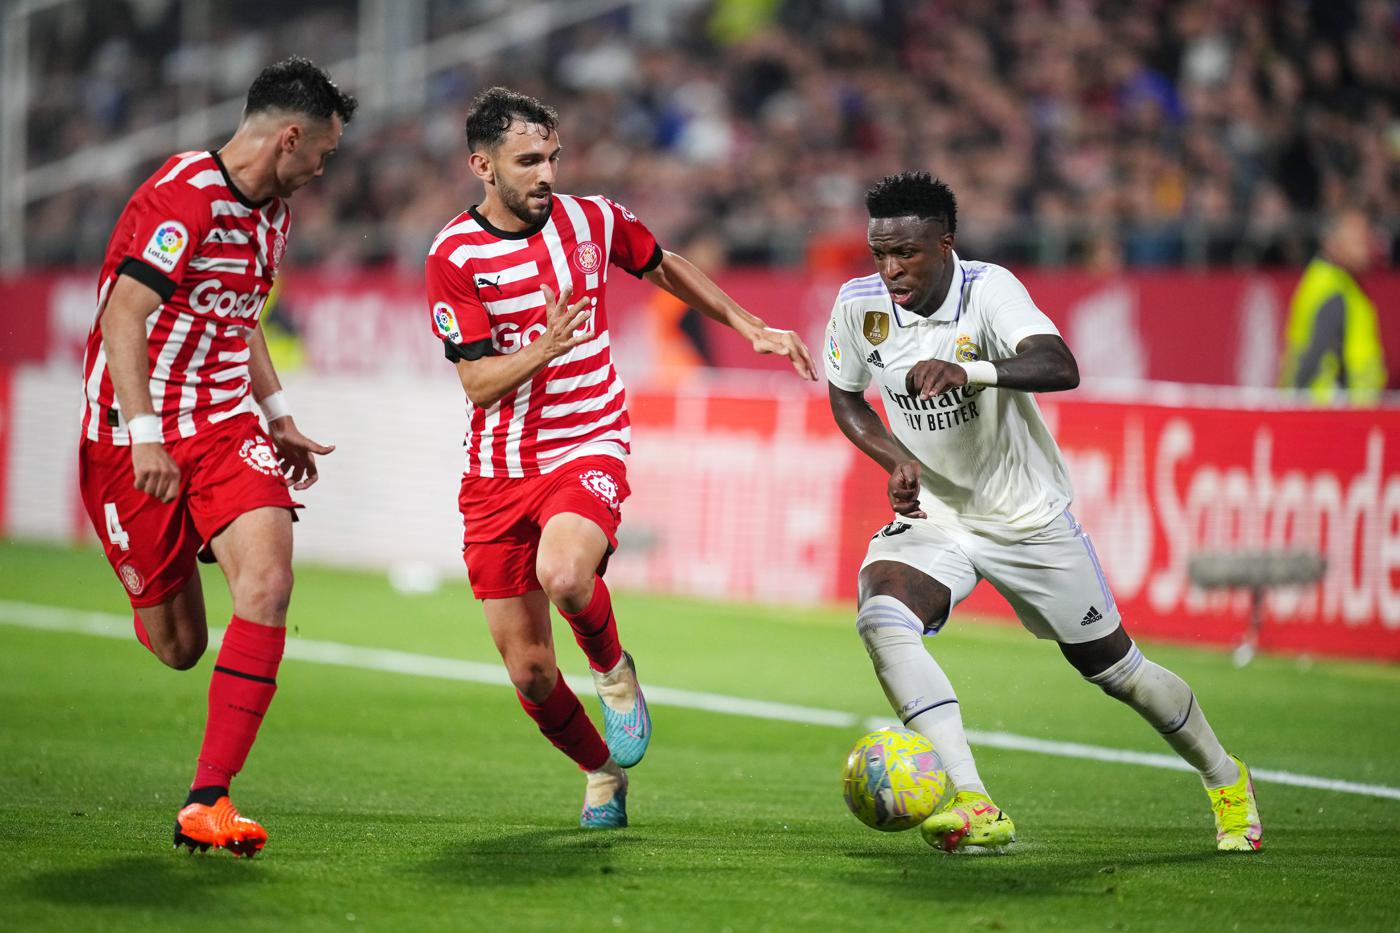 Girona - Real - 4:2. Spain Championship, round 31. Match Review, Statistics